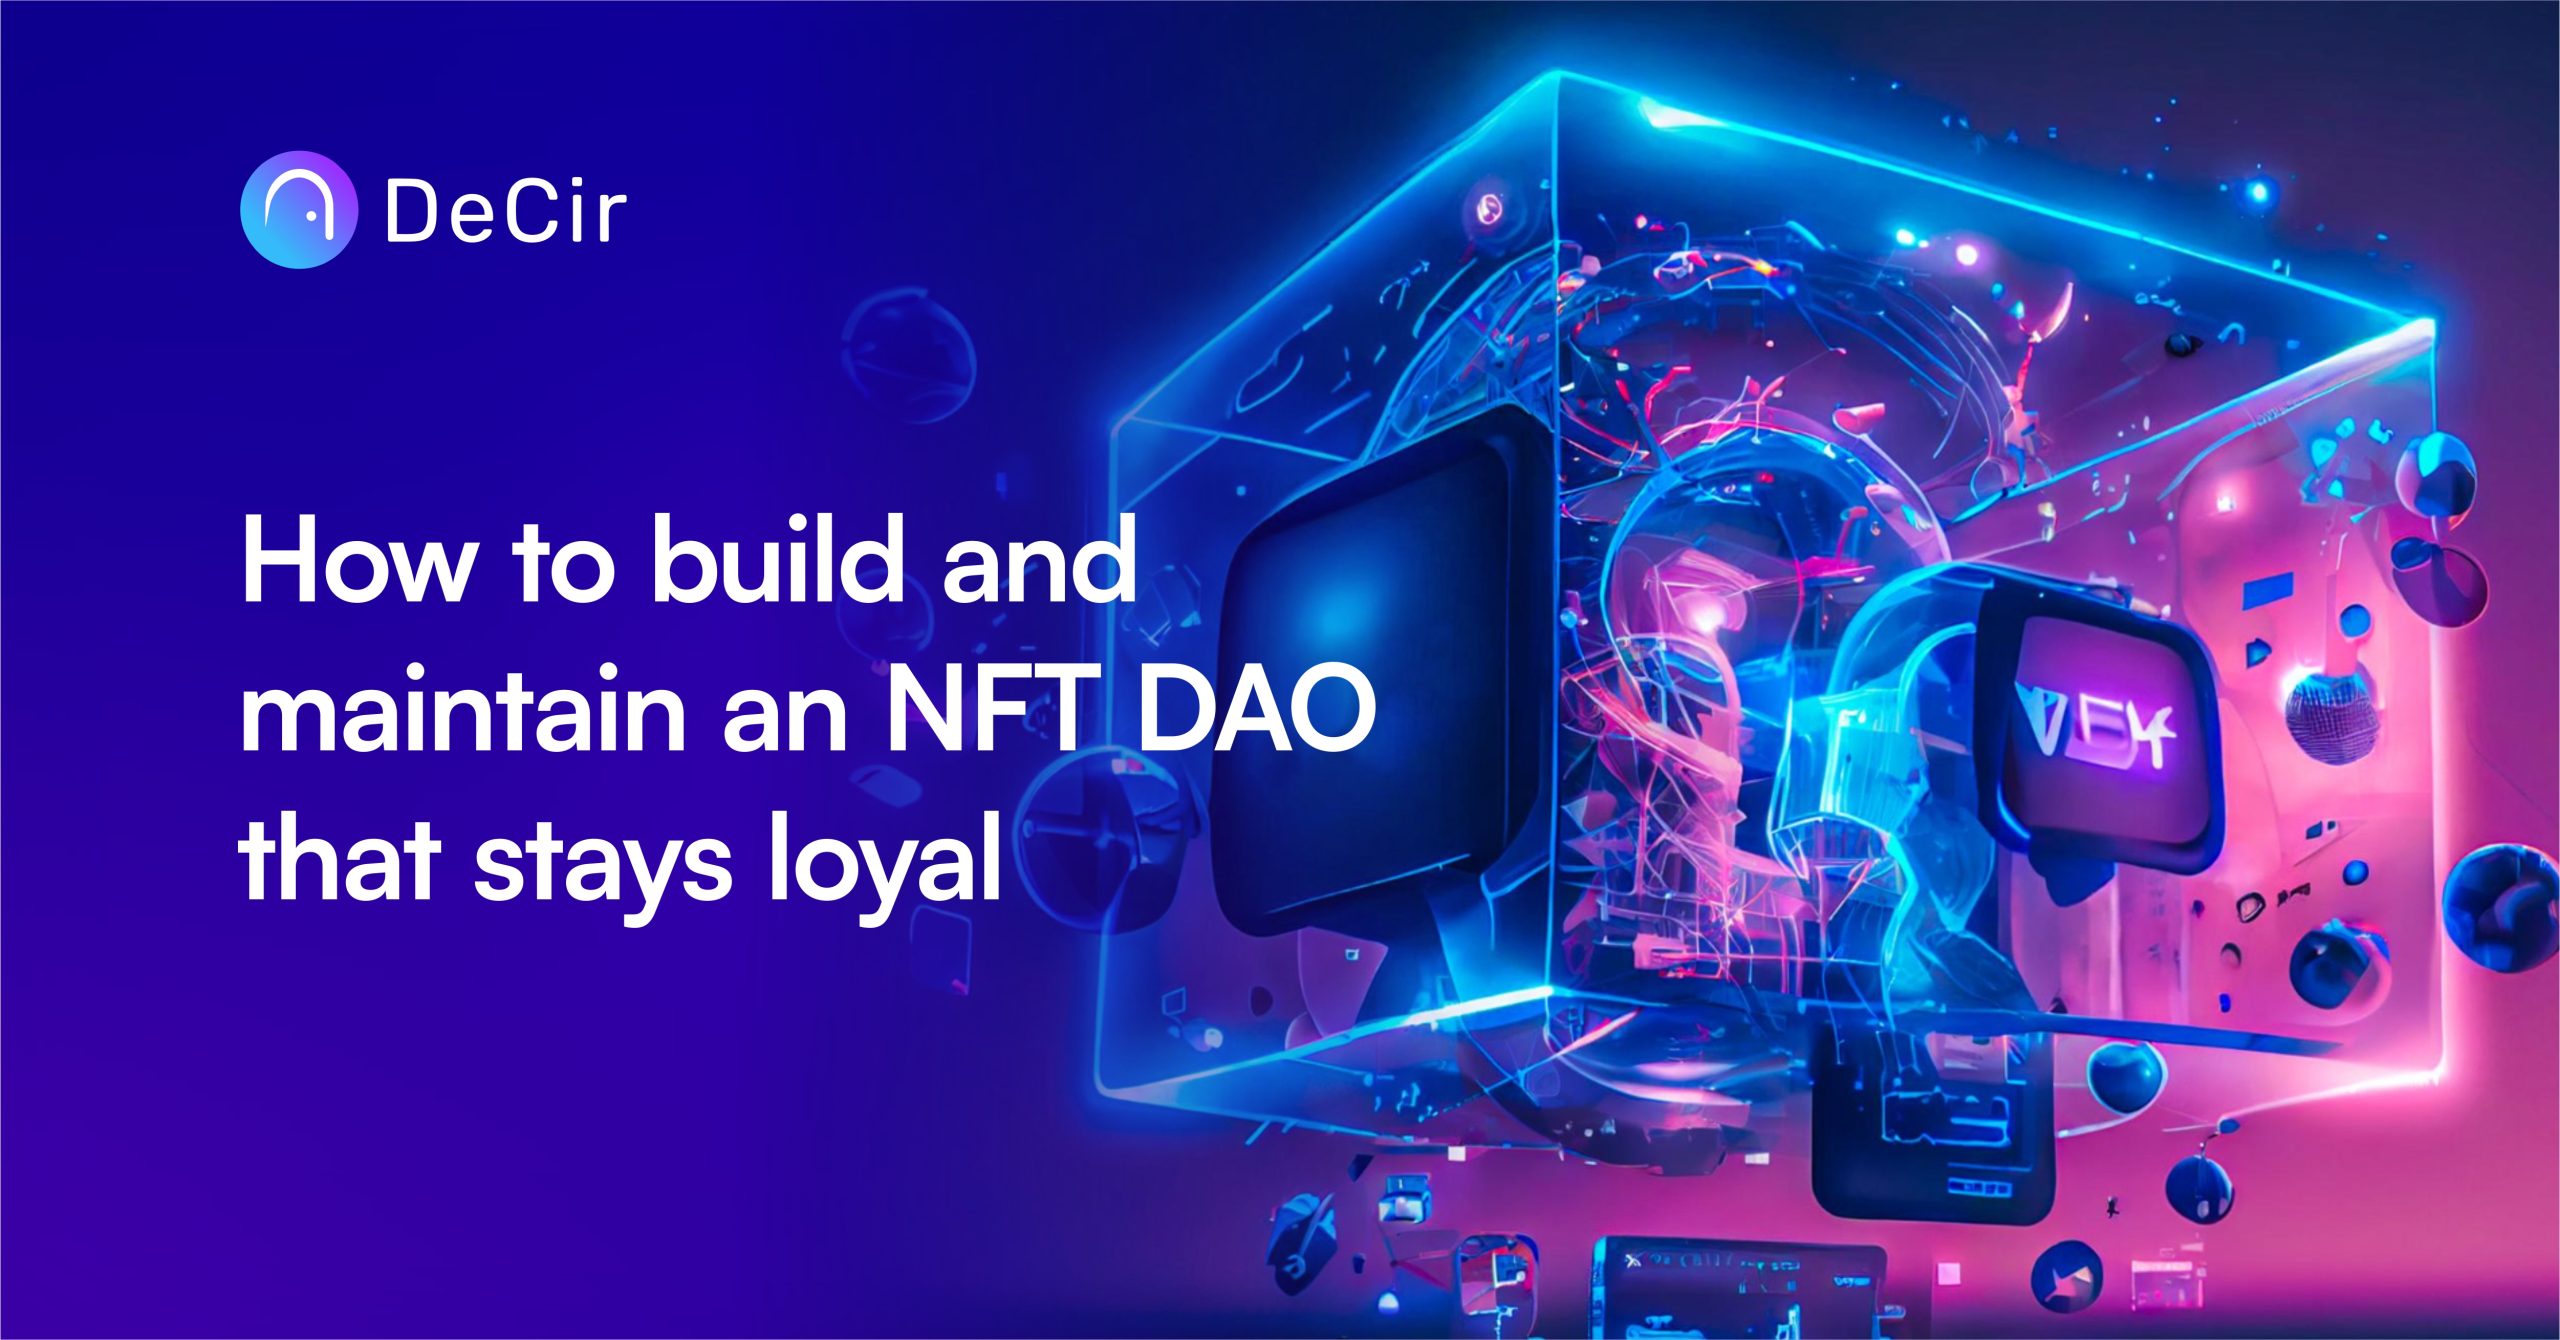 How to build and maintain an NFT DAO that stays loyal